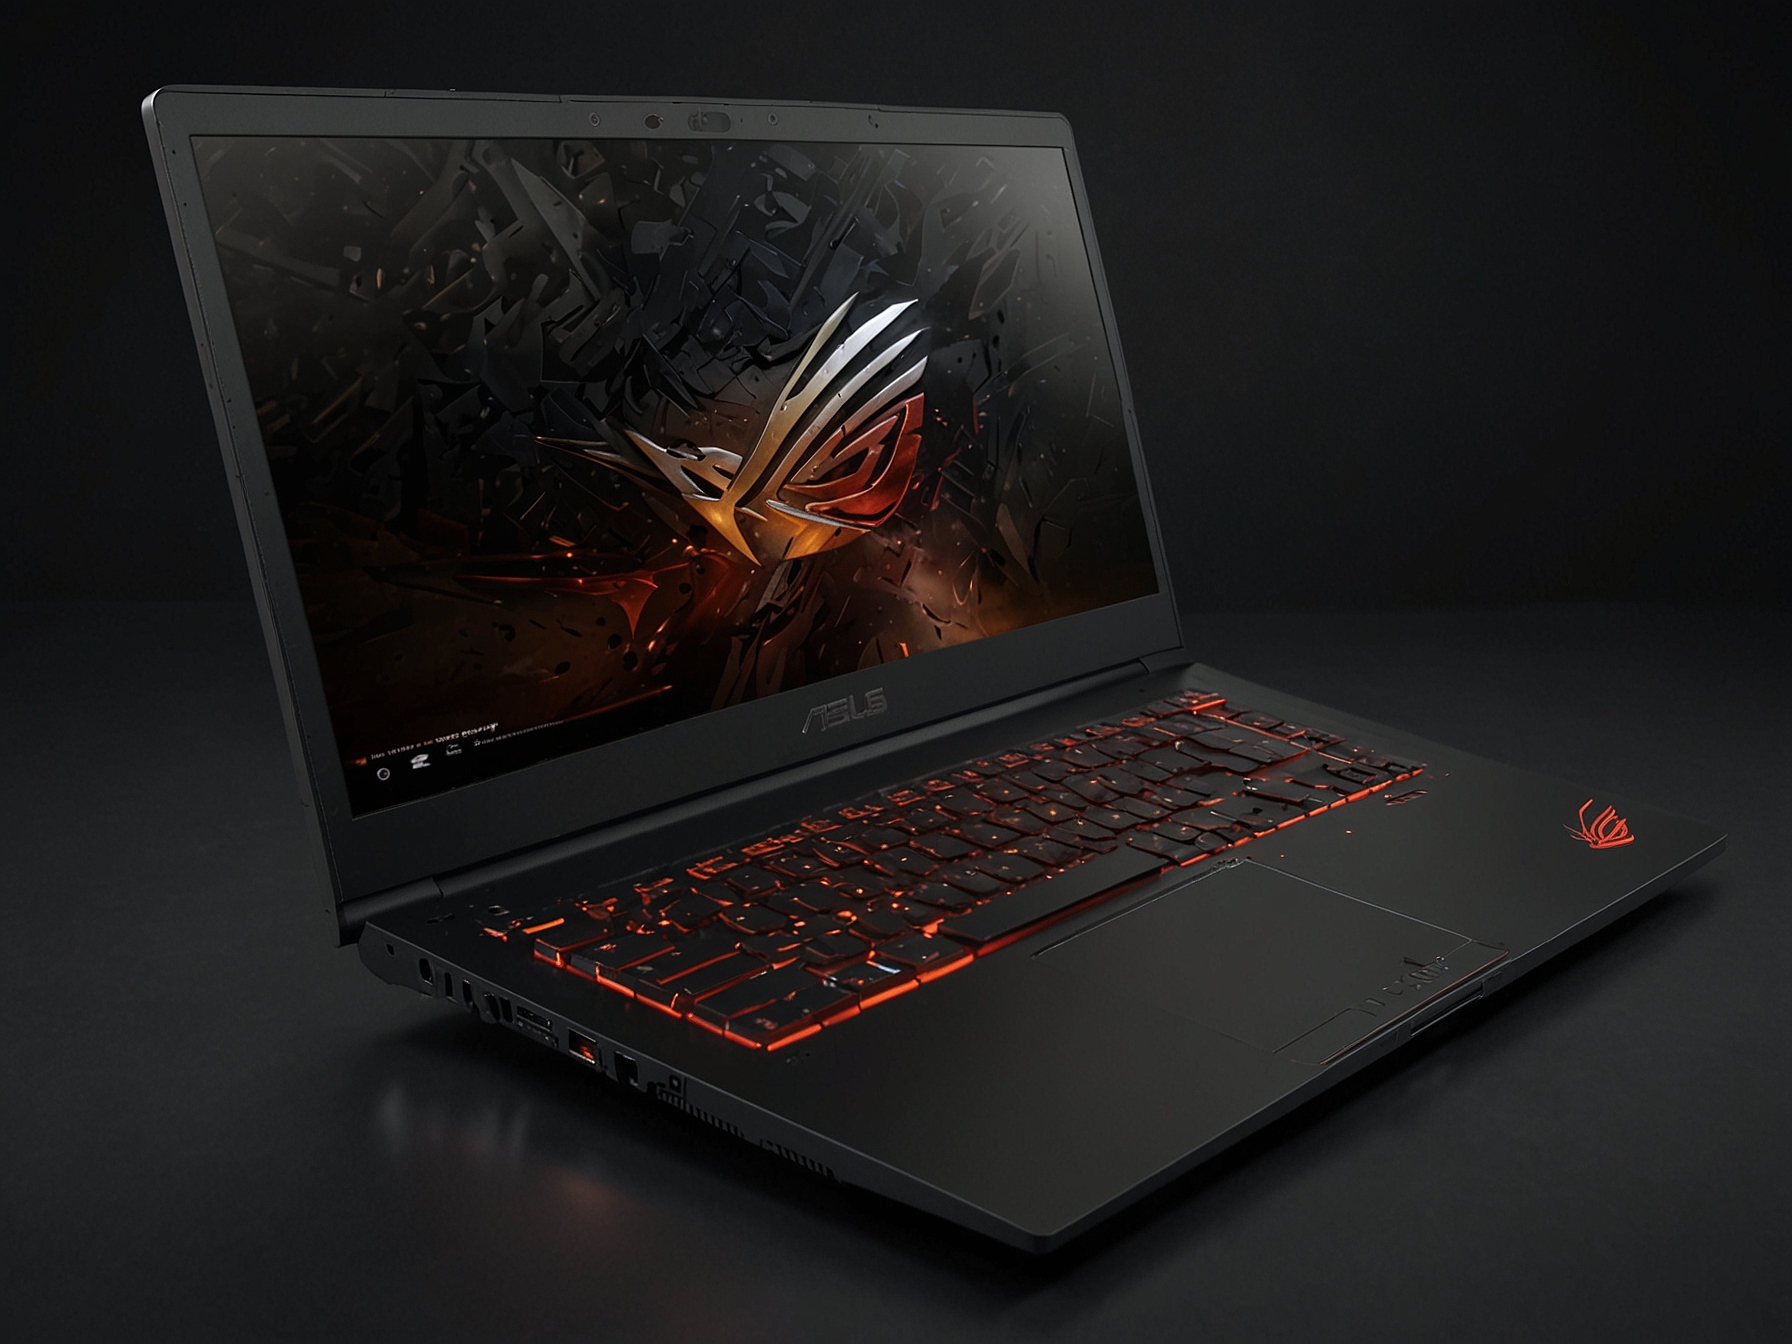 The Asus ROG Zephyrus G14 tilted open, highlighting its vibrant 14-inch Full HD display and robust magnesium-aluminum chassis, ideal for both gaming and professional use.